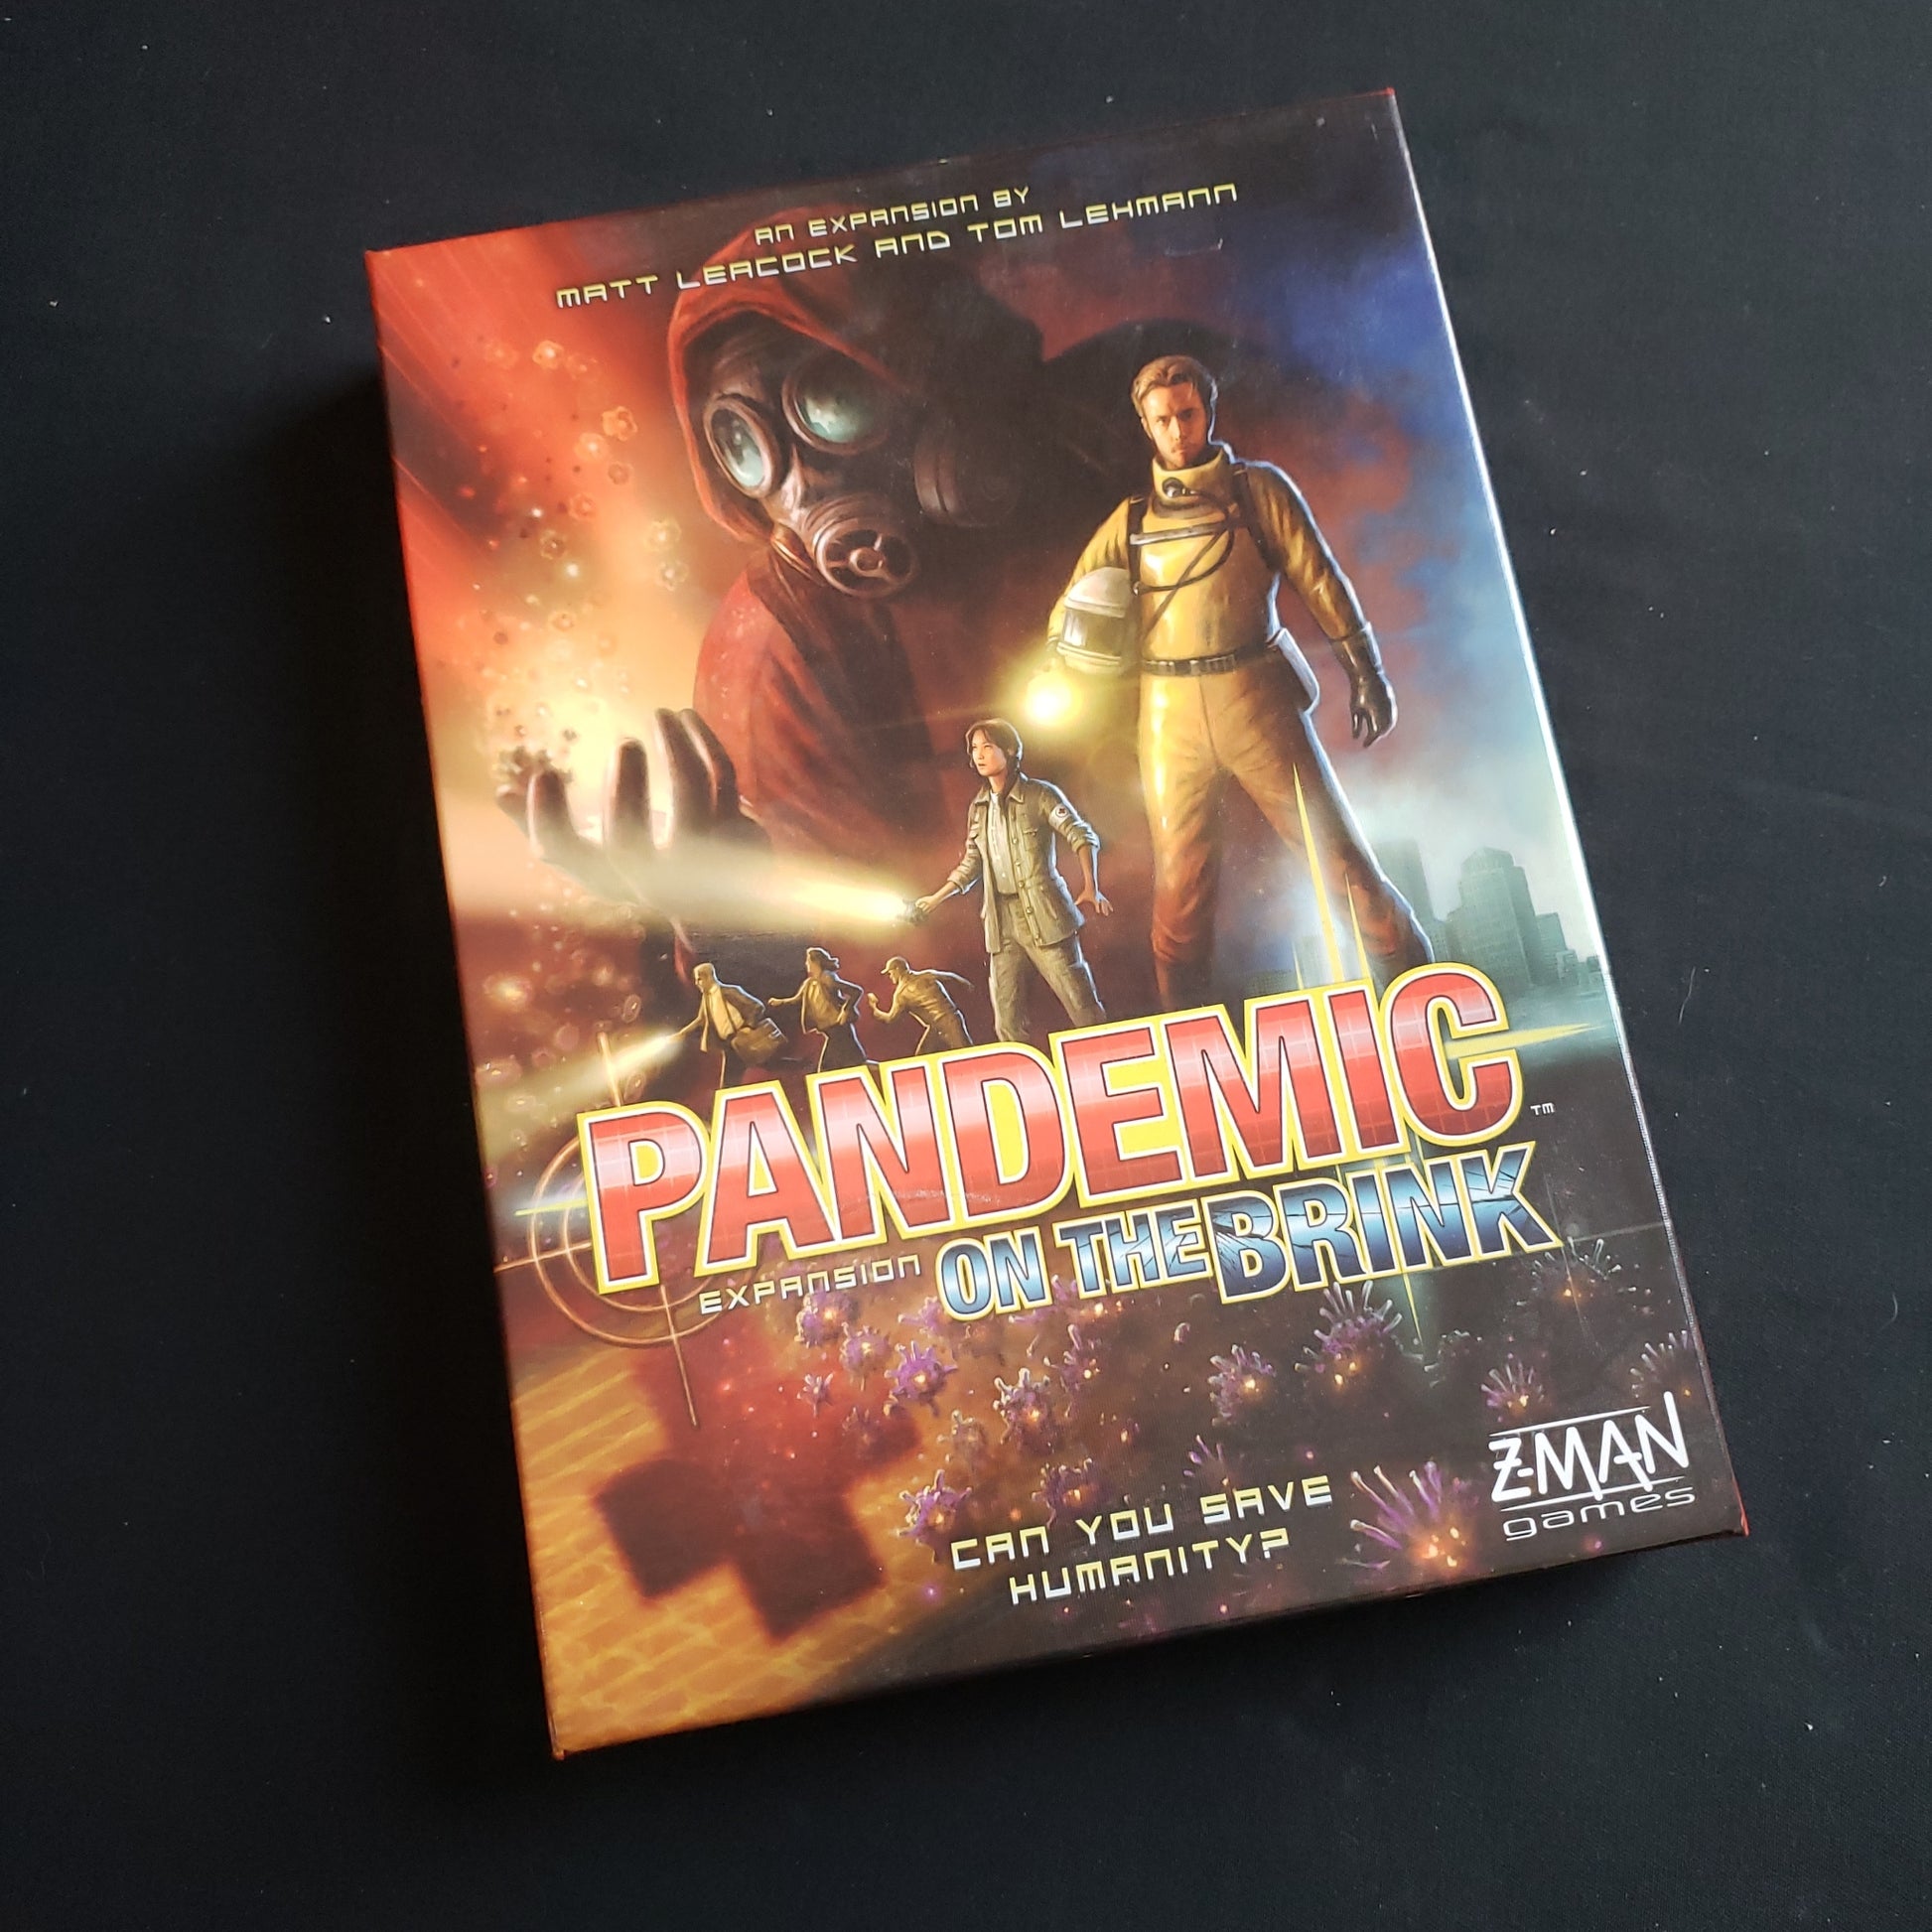 Image shows the front cover of the box of the On the Brink expansion for the Pandemic board game